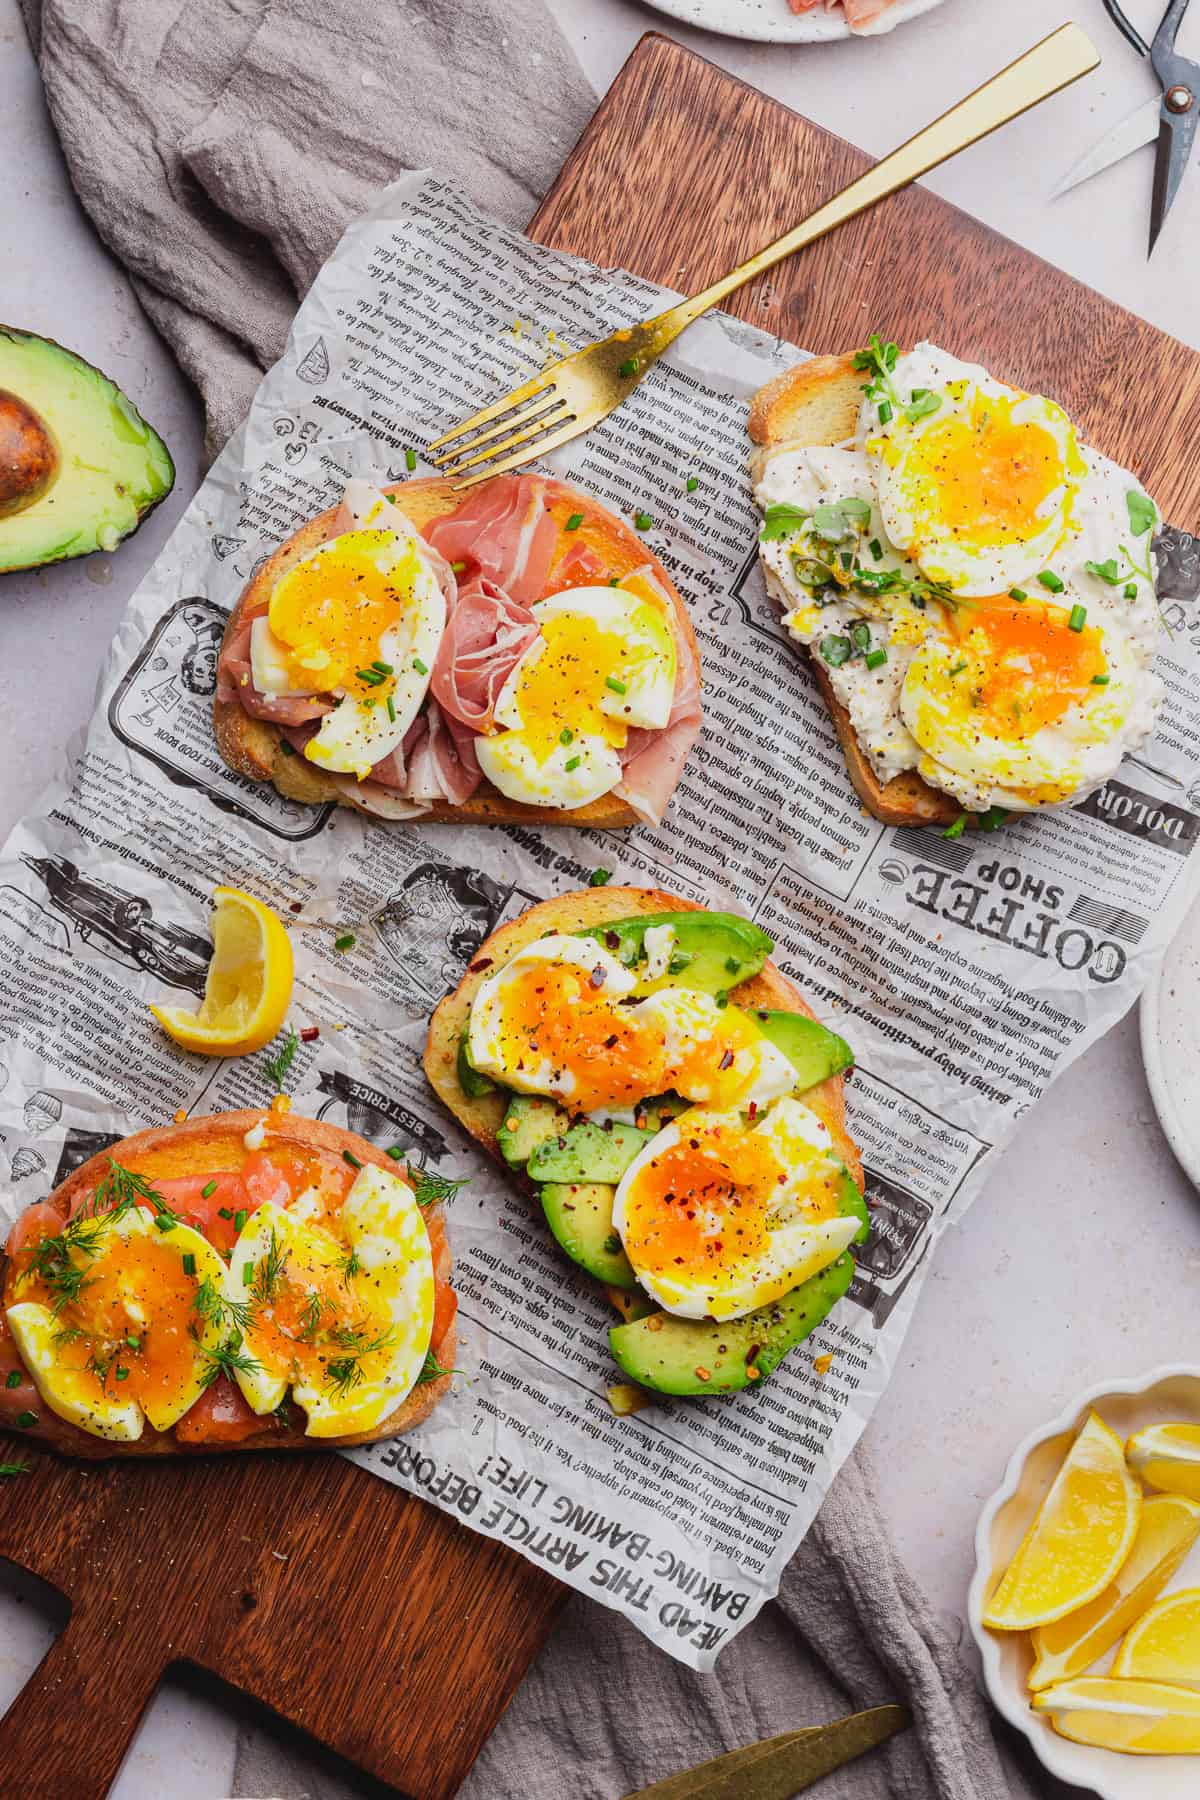 beautiful smashed eggs with runny yolks on toast with prosciutto, avocado, smoked salmon, fresh herbs and burrata cheese on a newspaper